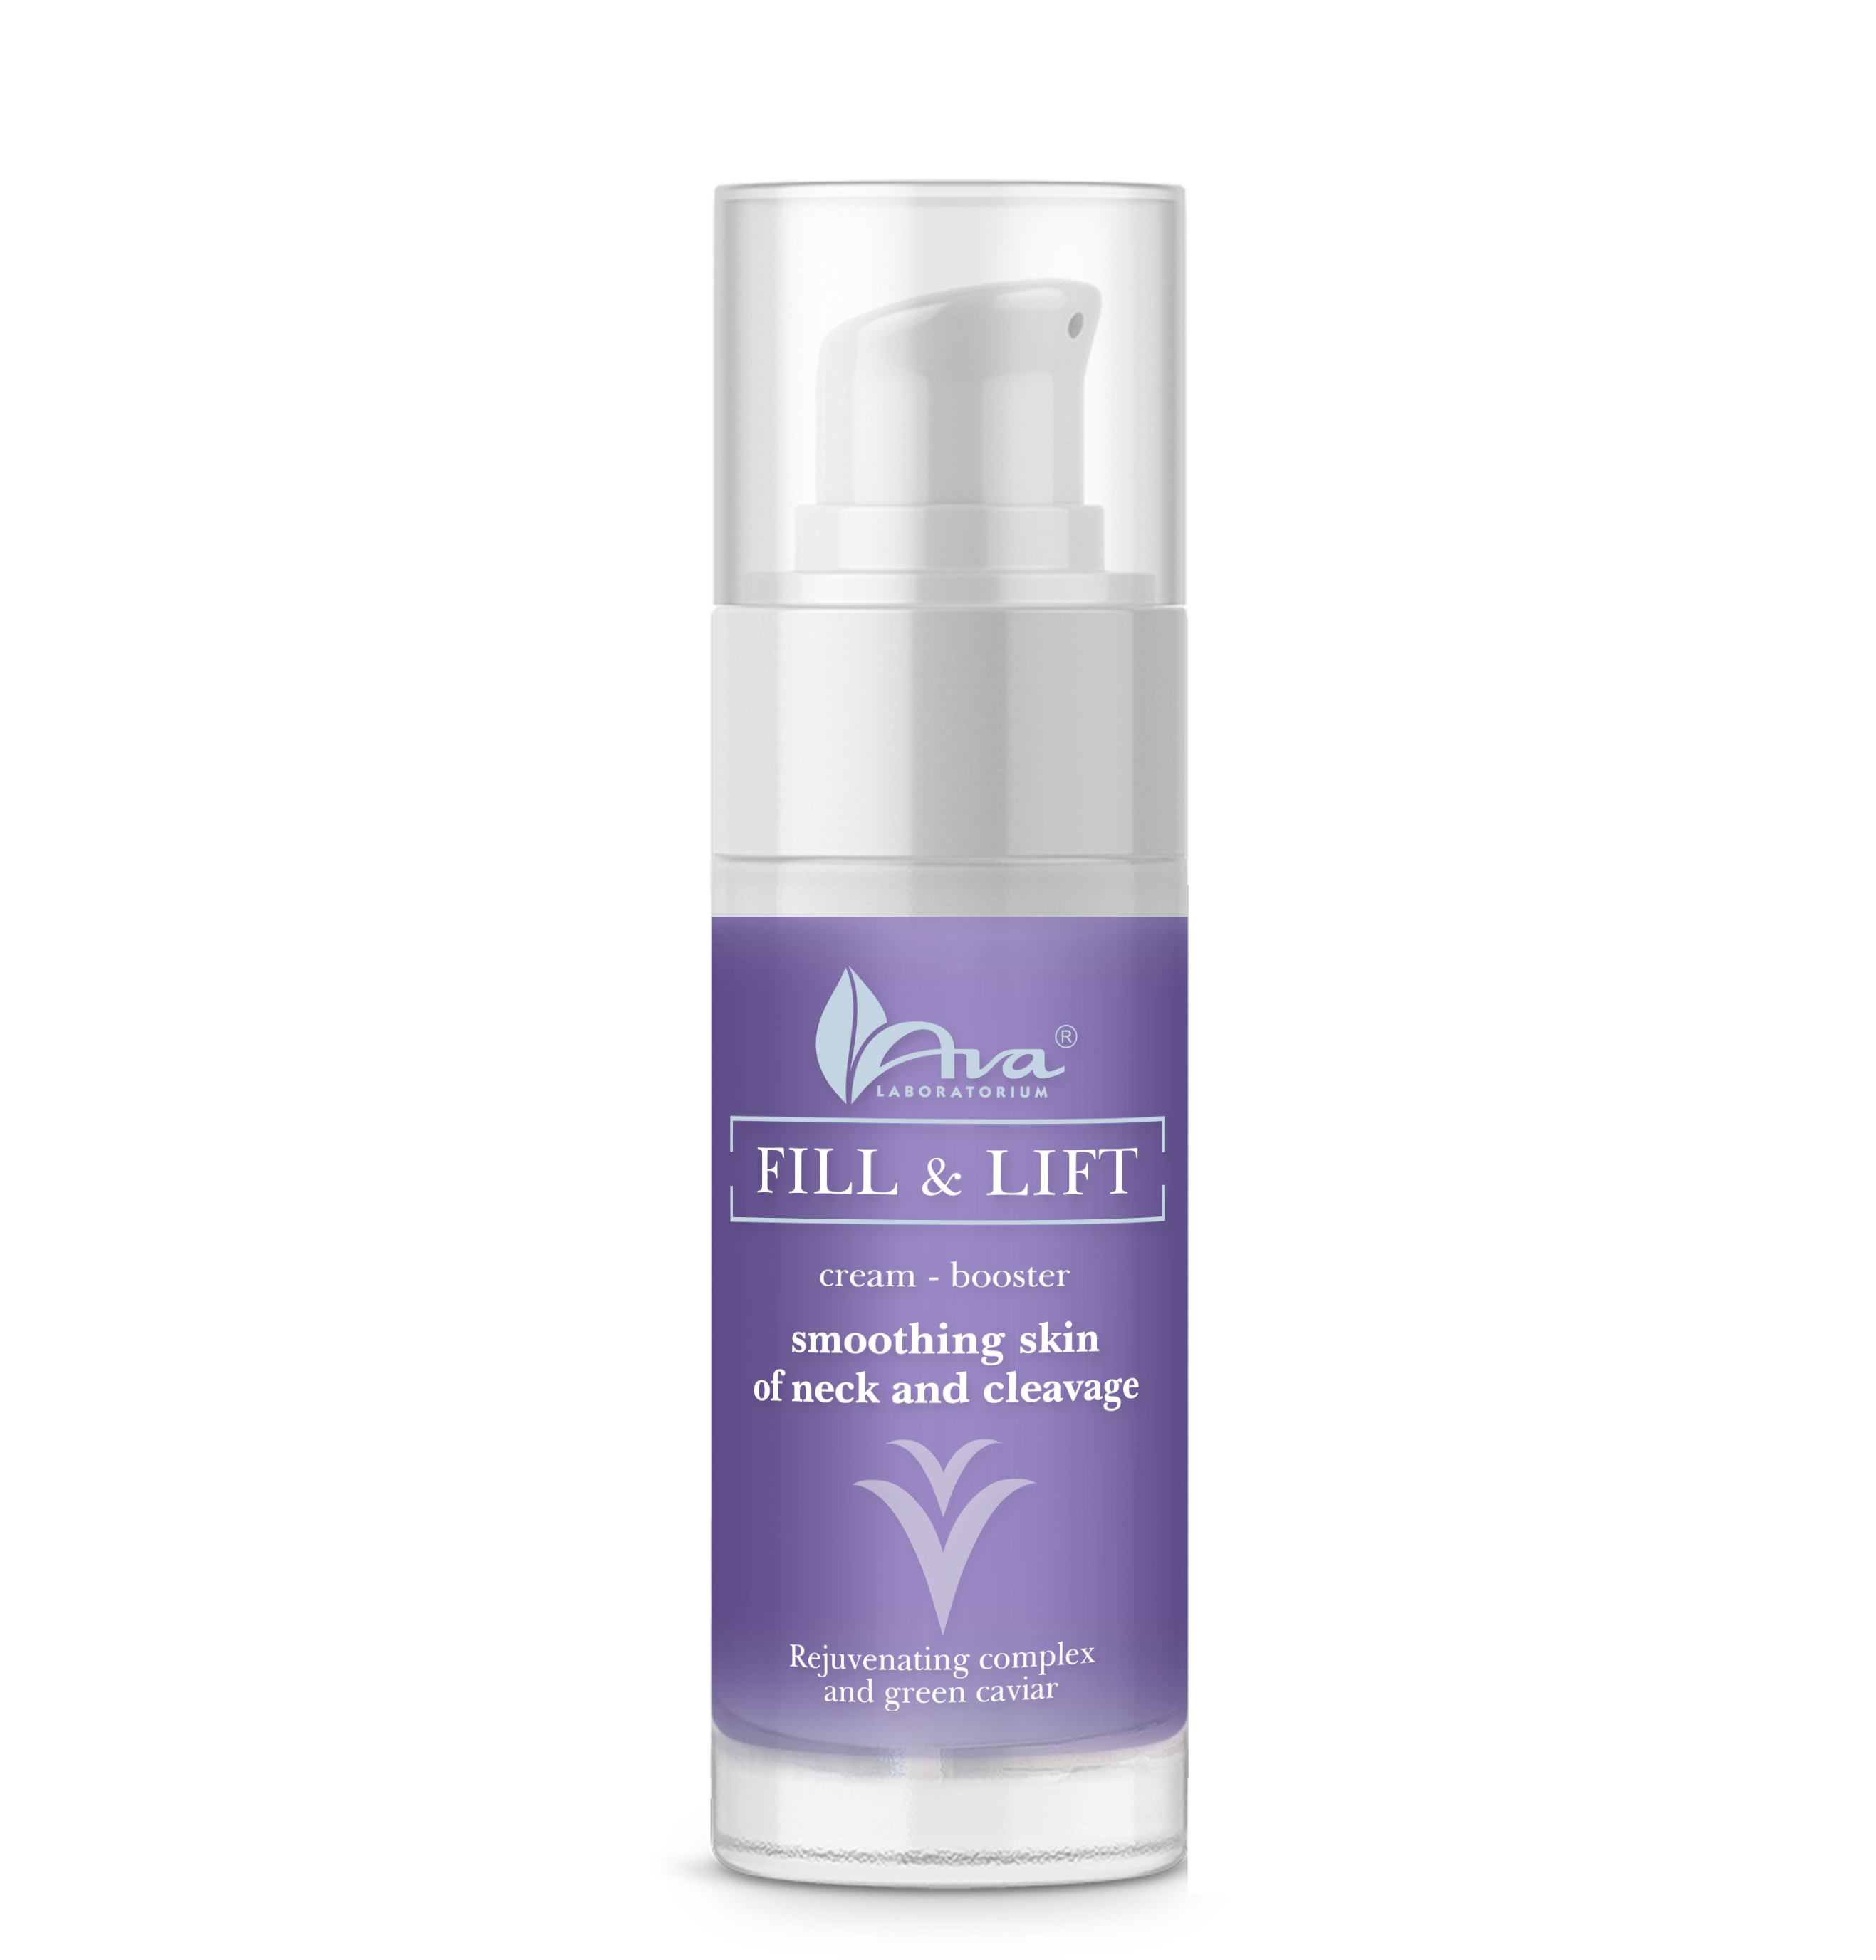 8929_FILL&LIFT_cream_booster_smoothing_skin_of_neck_and_cleavage_BOTTLE_ENG